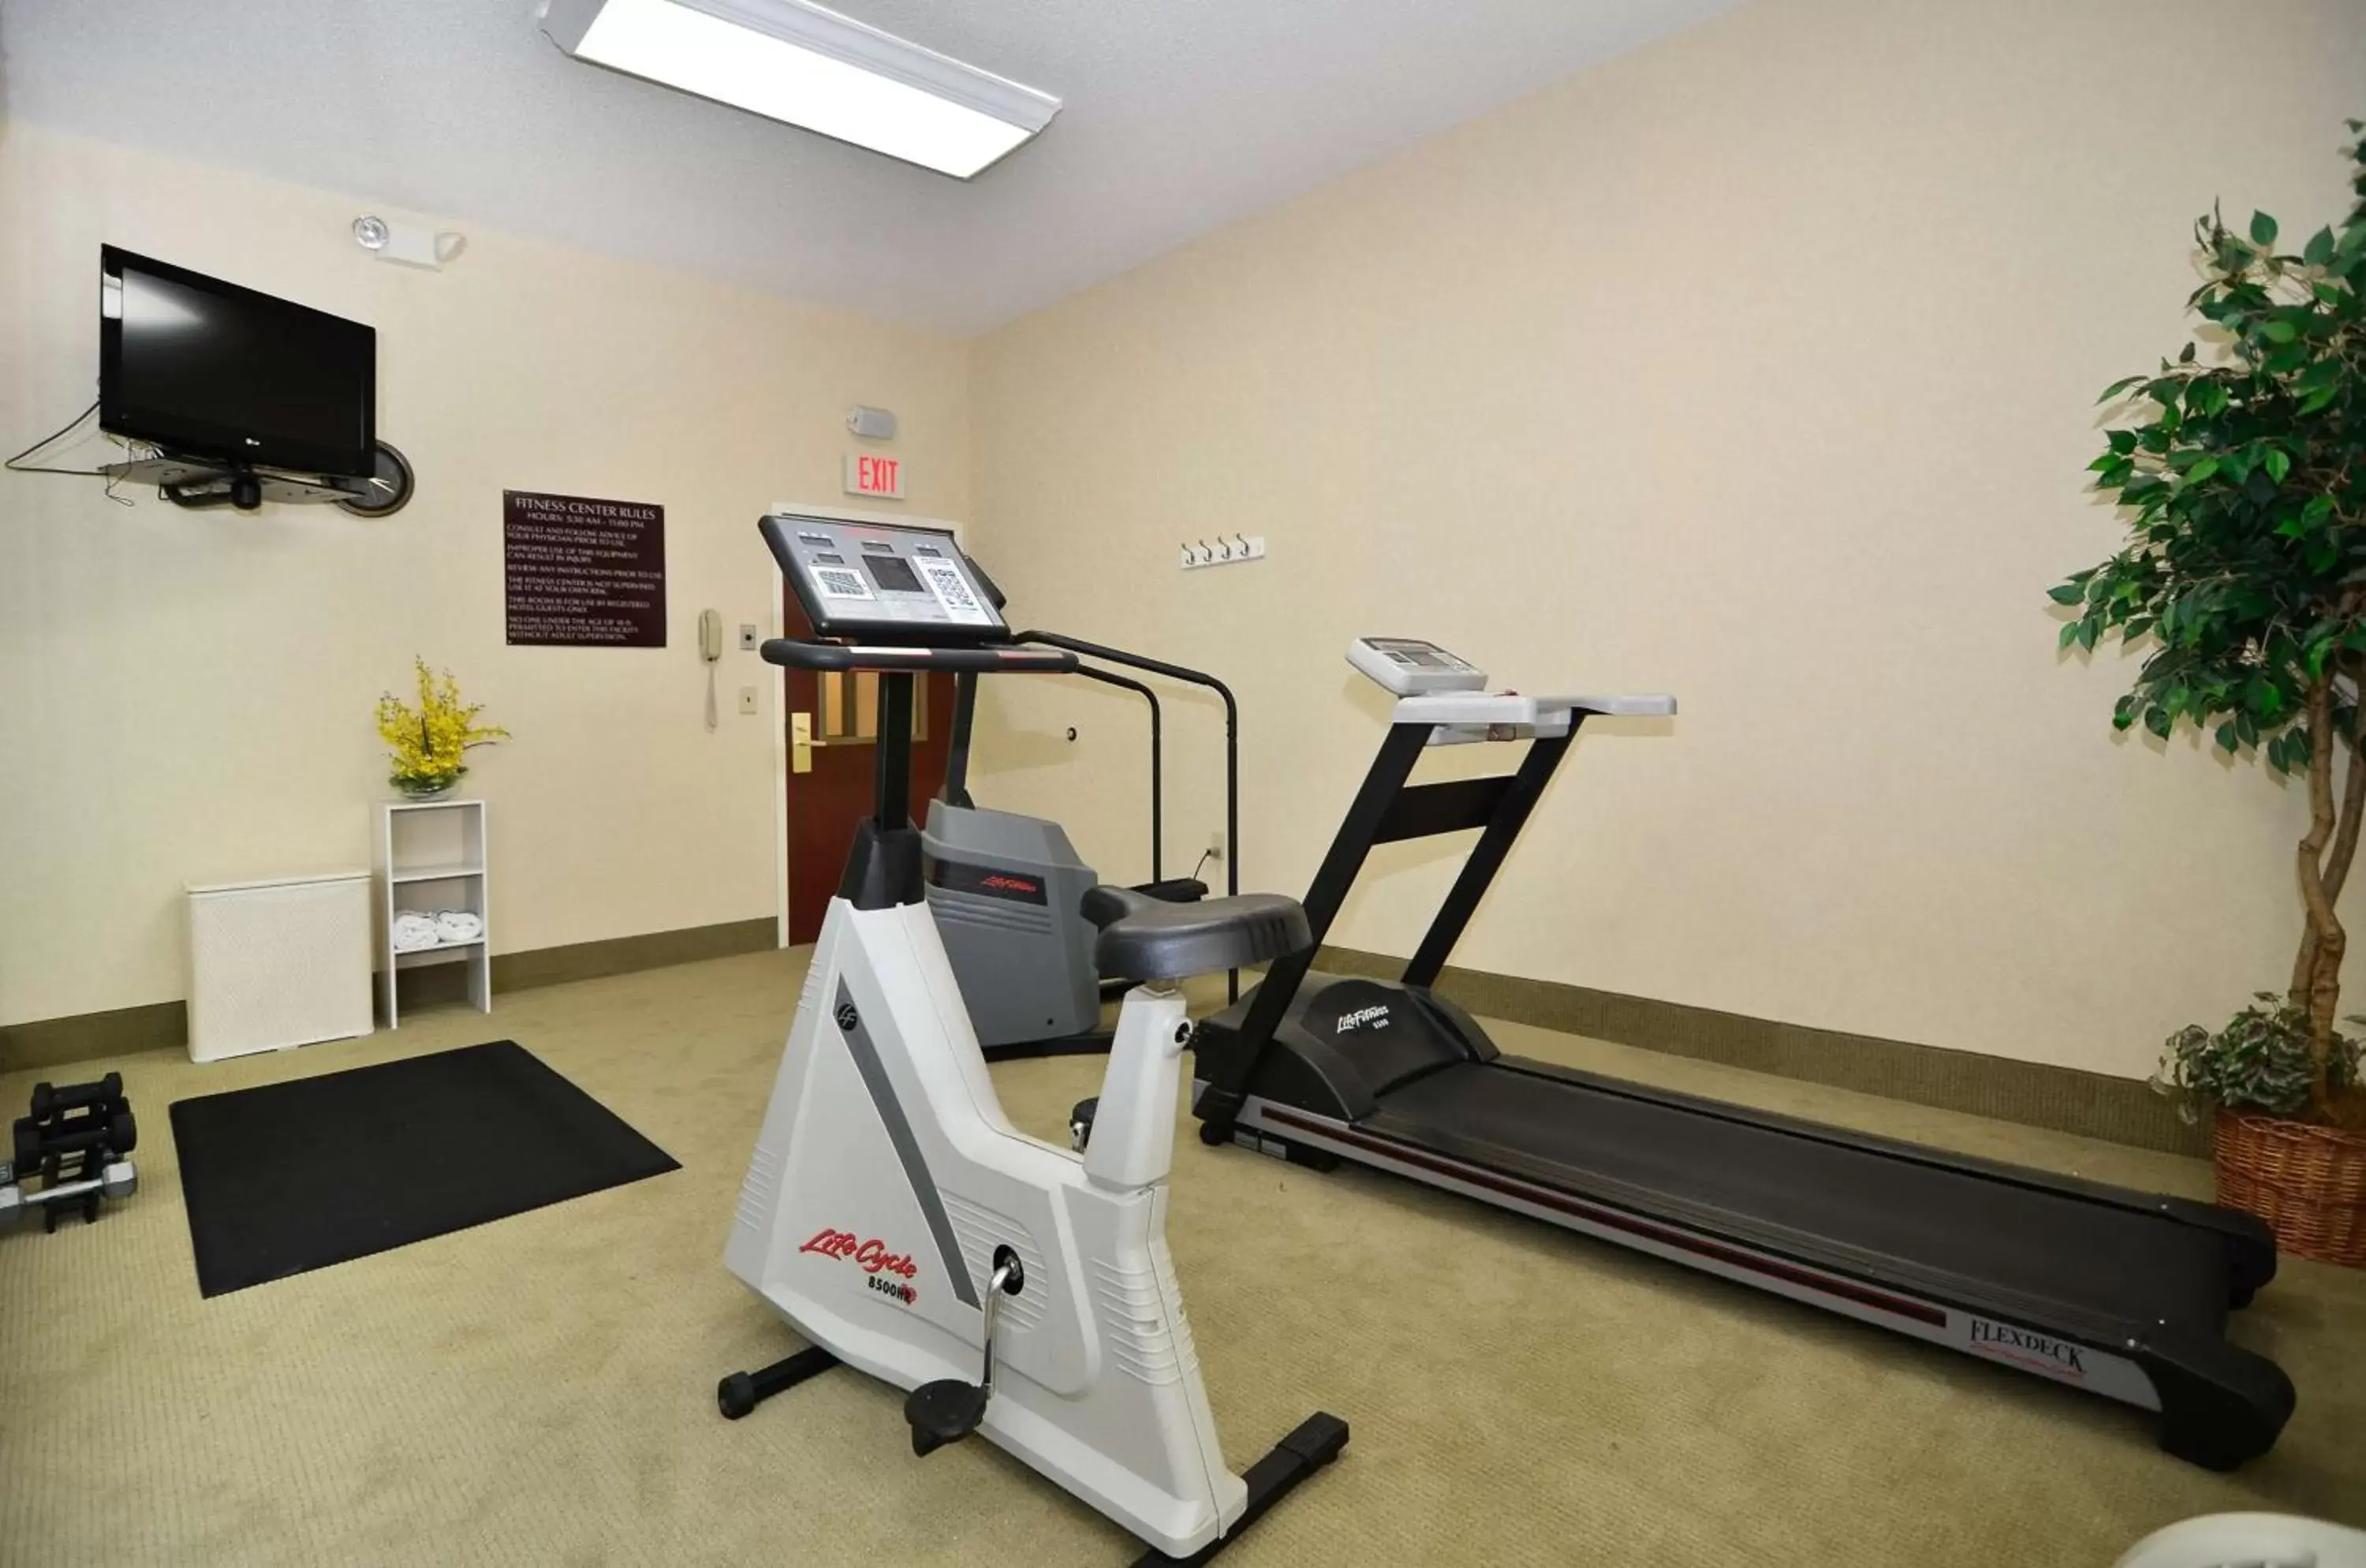 Fitness centre/facilities, Fitness Center/Facilities in Best Western Hiram Inn and Suites